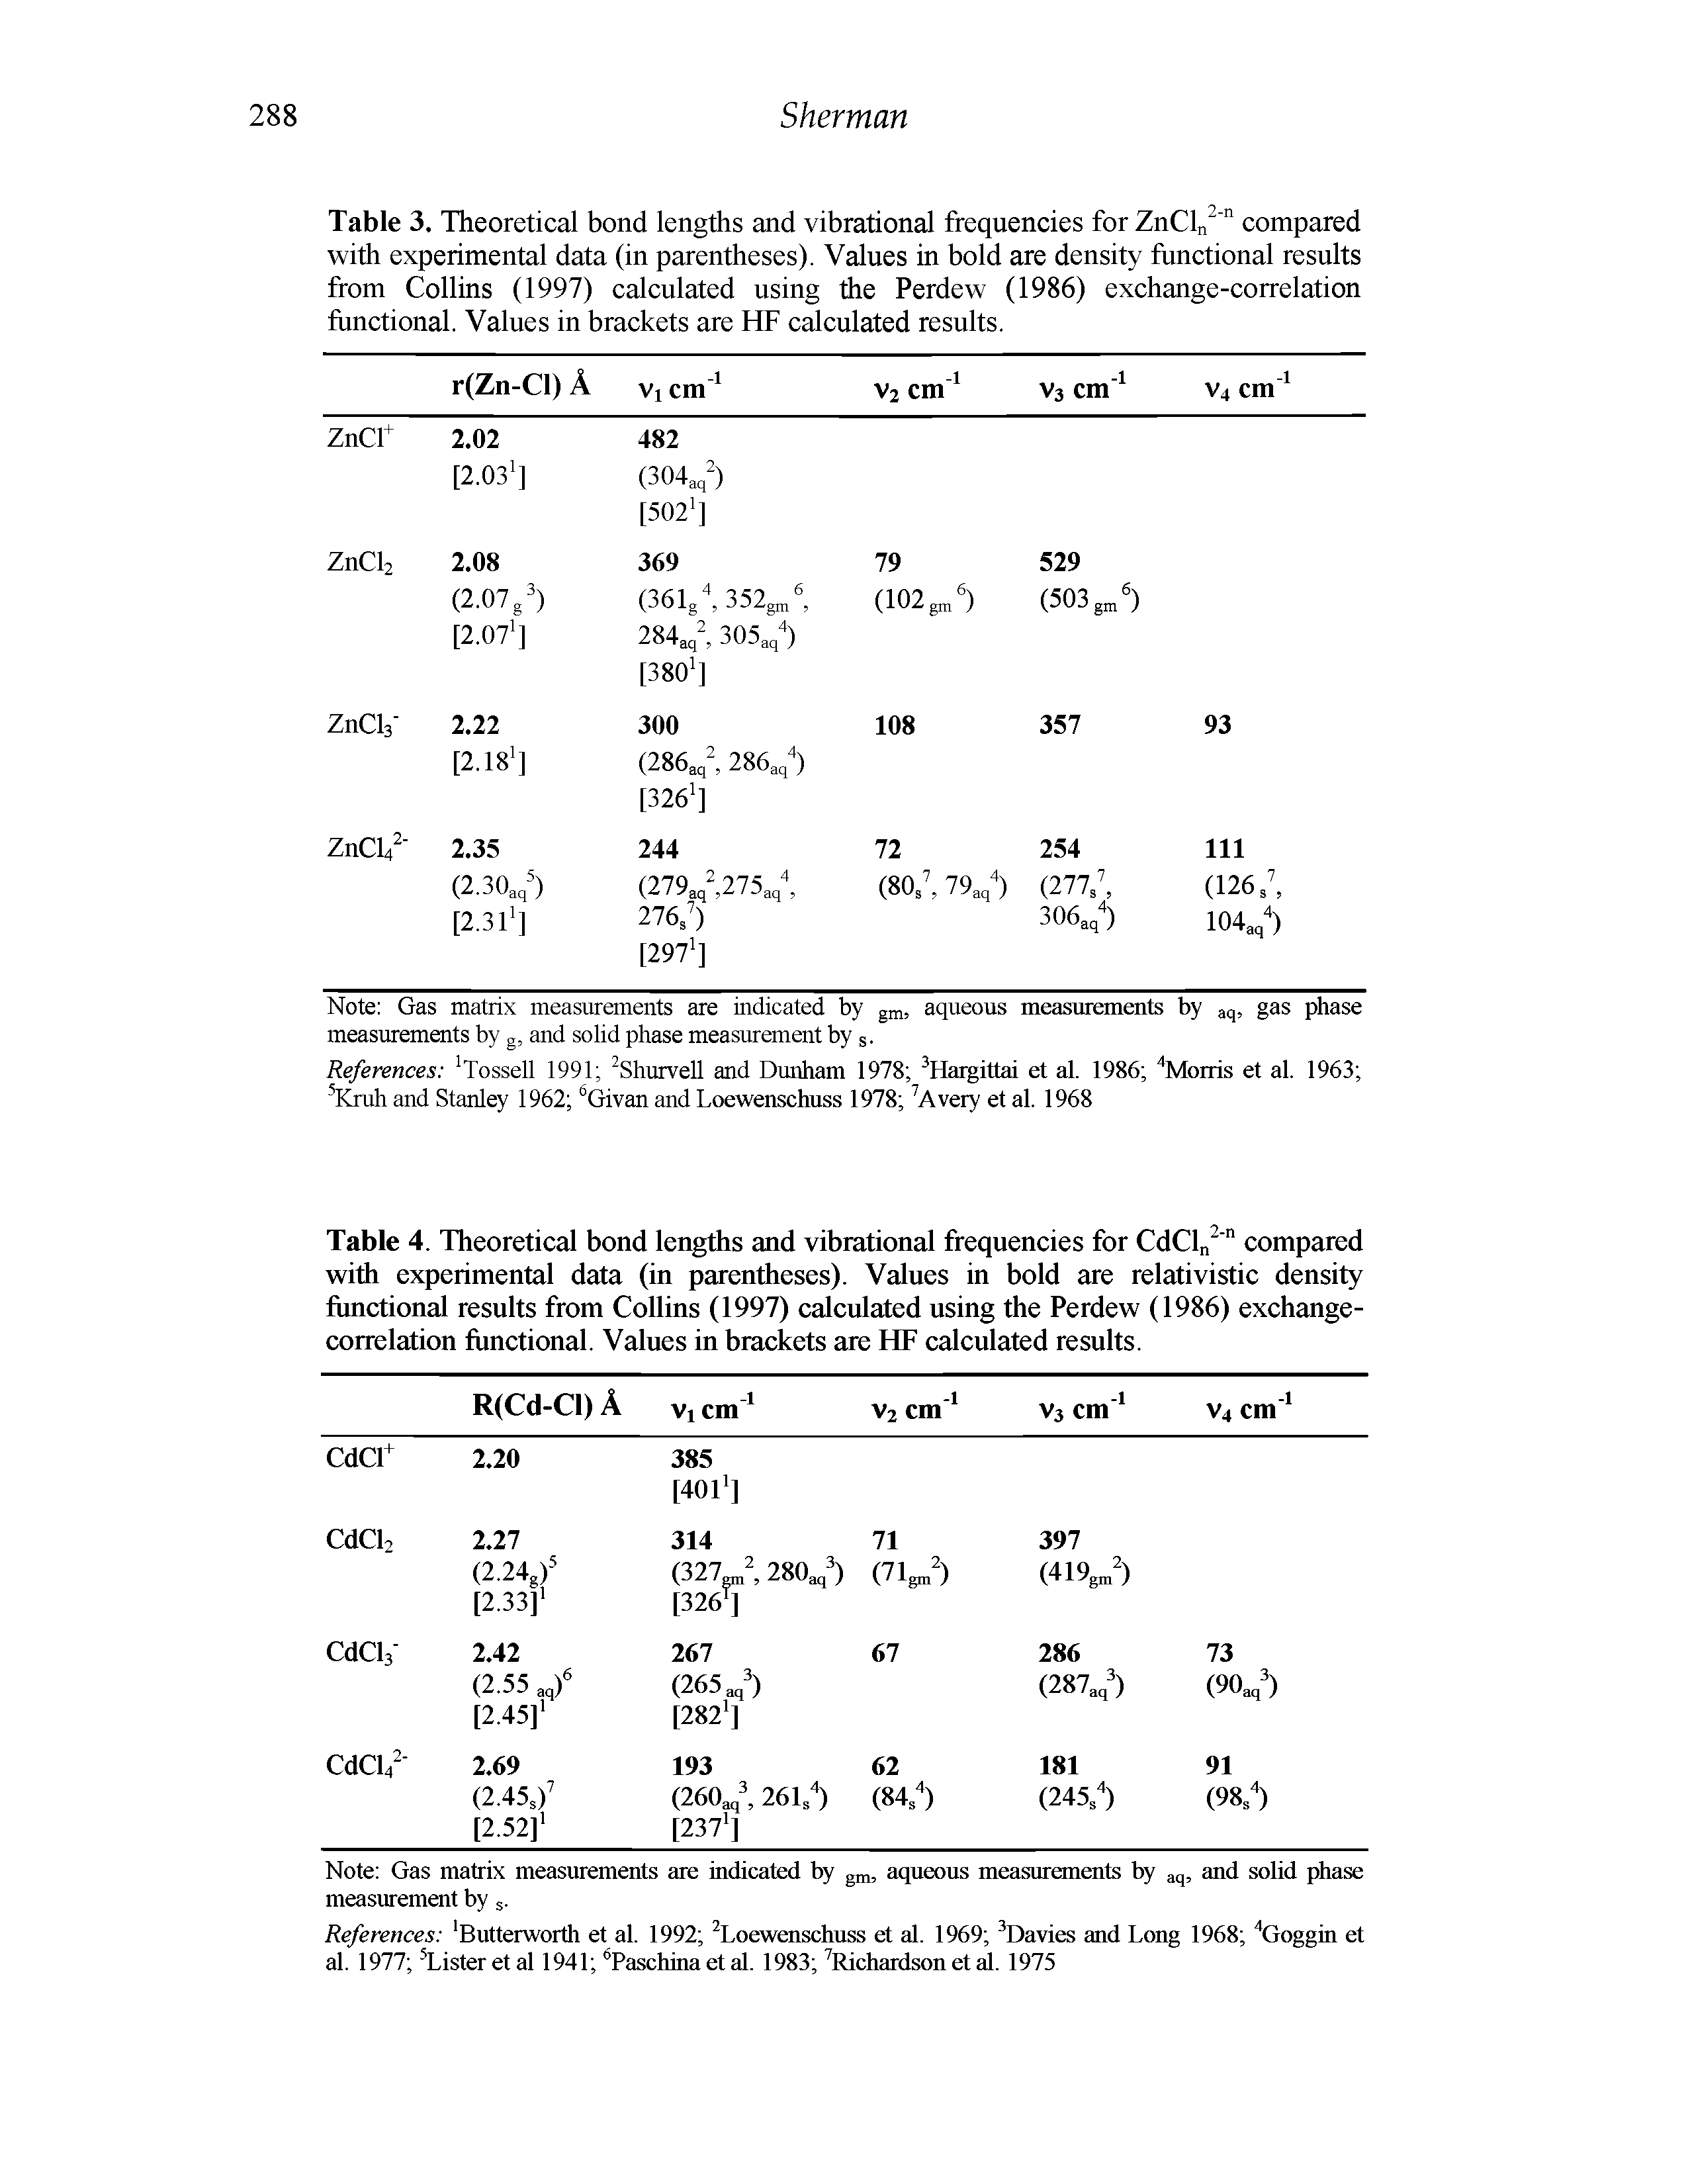 Table 3. Theoretical bond lengths and vibrational frequencies for ZnCln " compared with experimental data (in parentheses). Values in bold are density functional results from Collins (1997) calculated using the Perdew (1986) exchange-correlation functional. Values in brackets are HF calculated results.